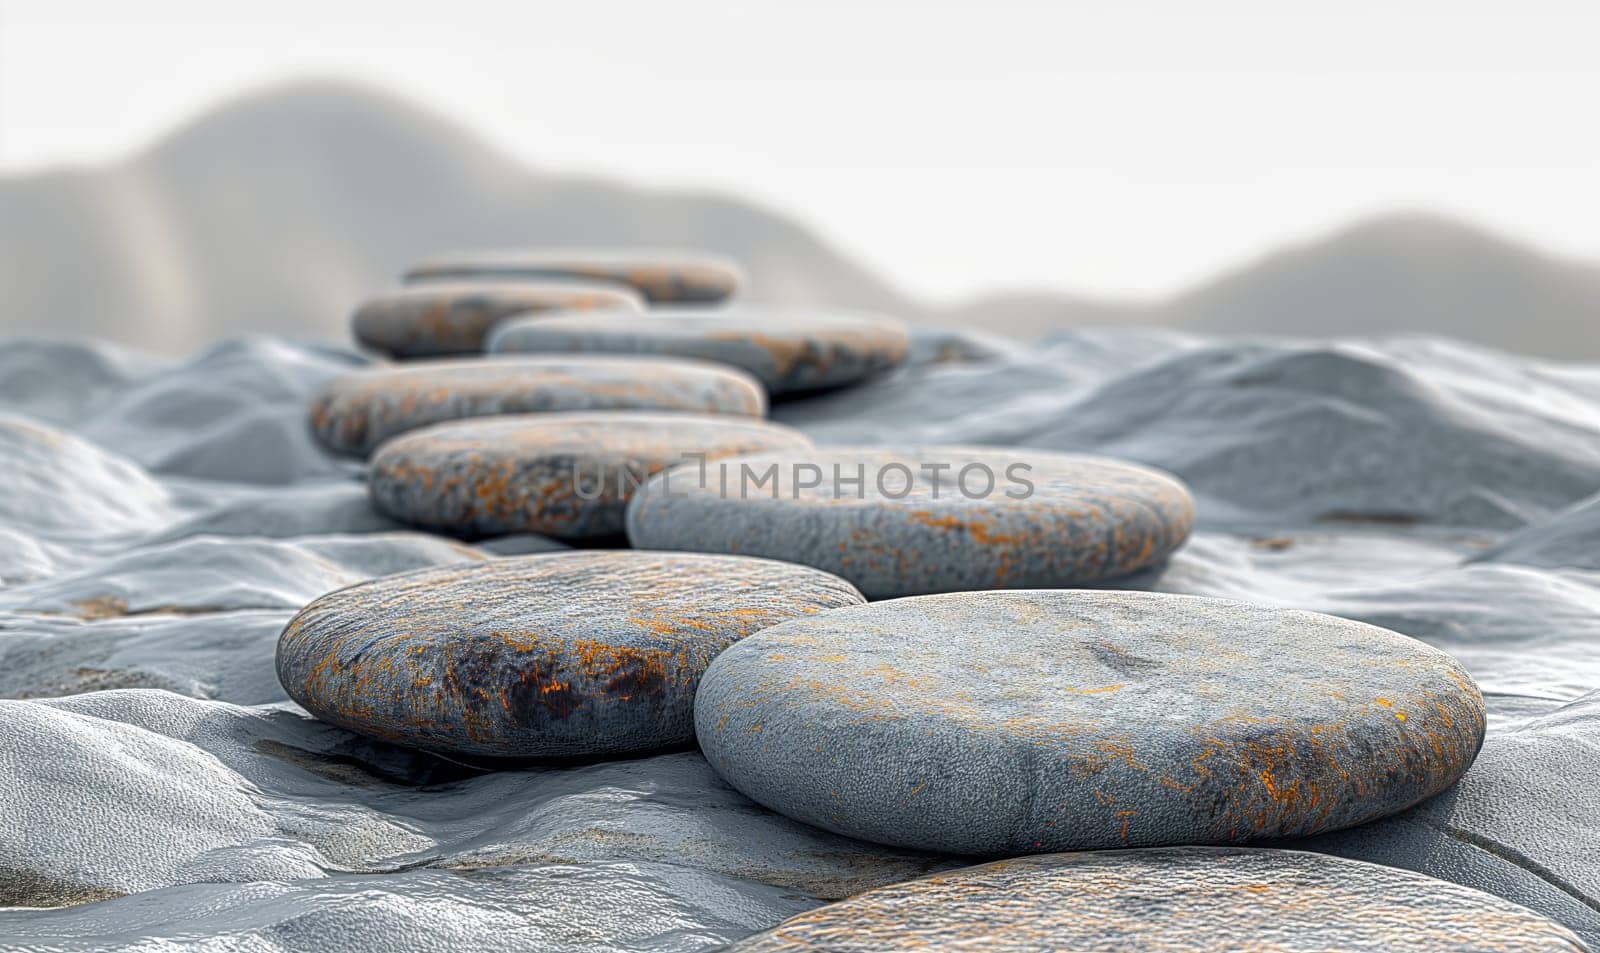 Serene balance of smooth stones stacked by water.